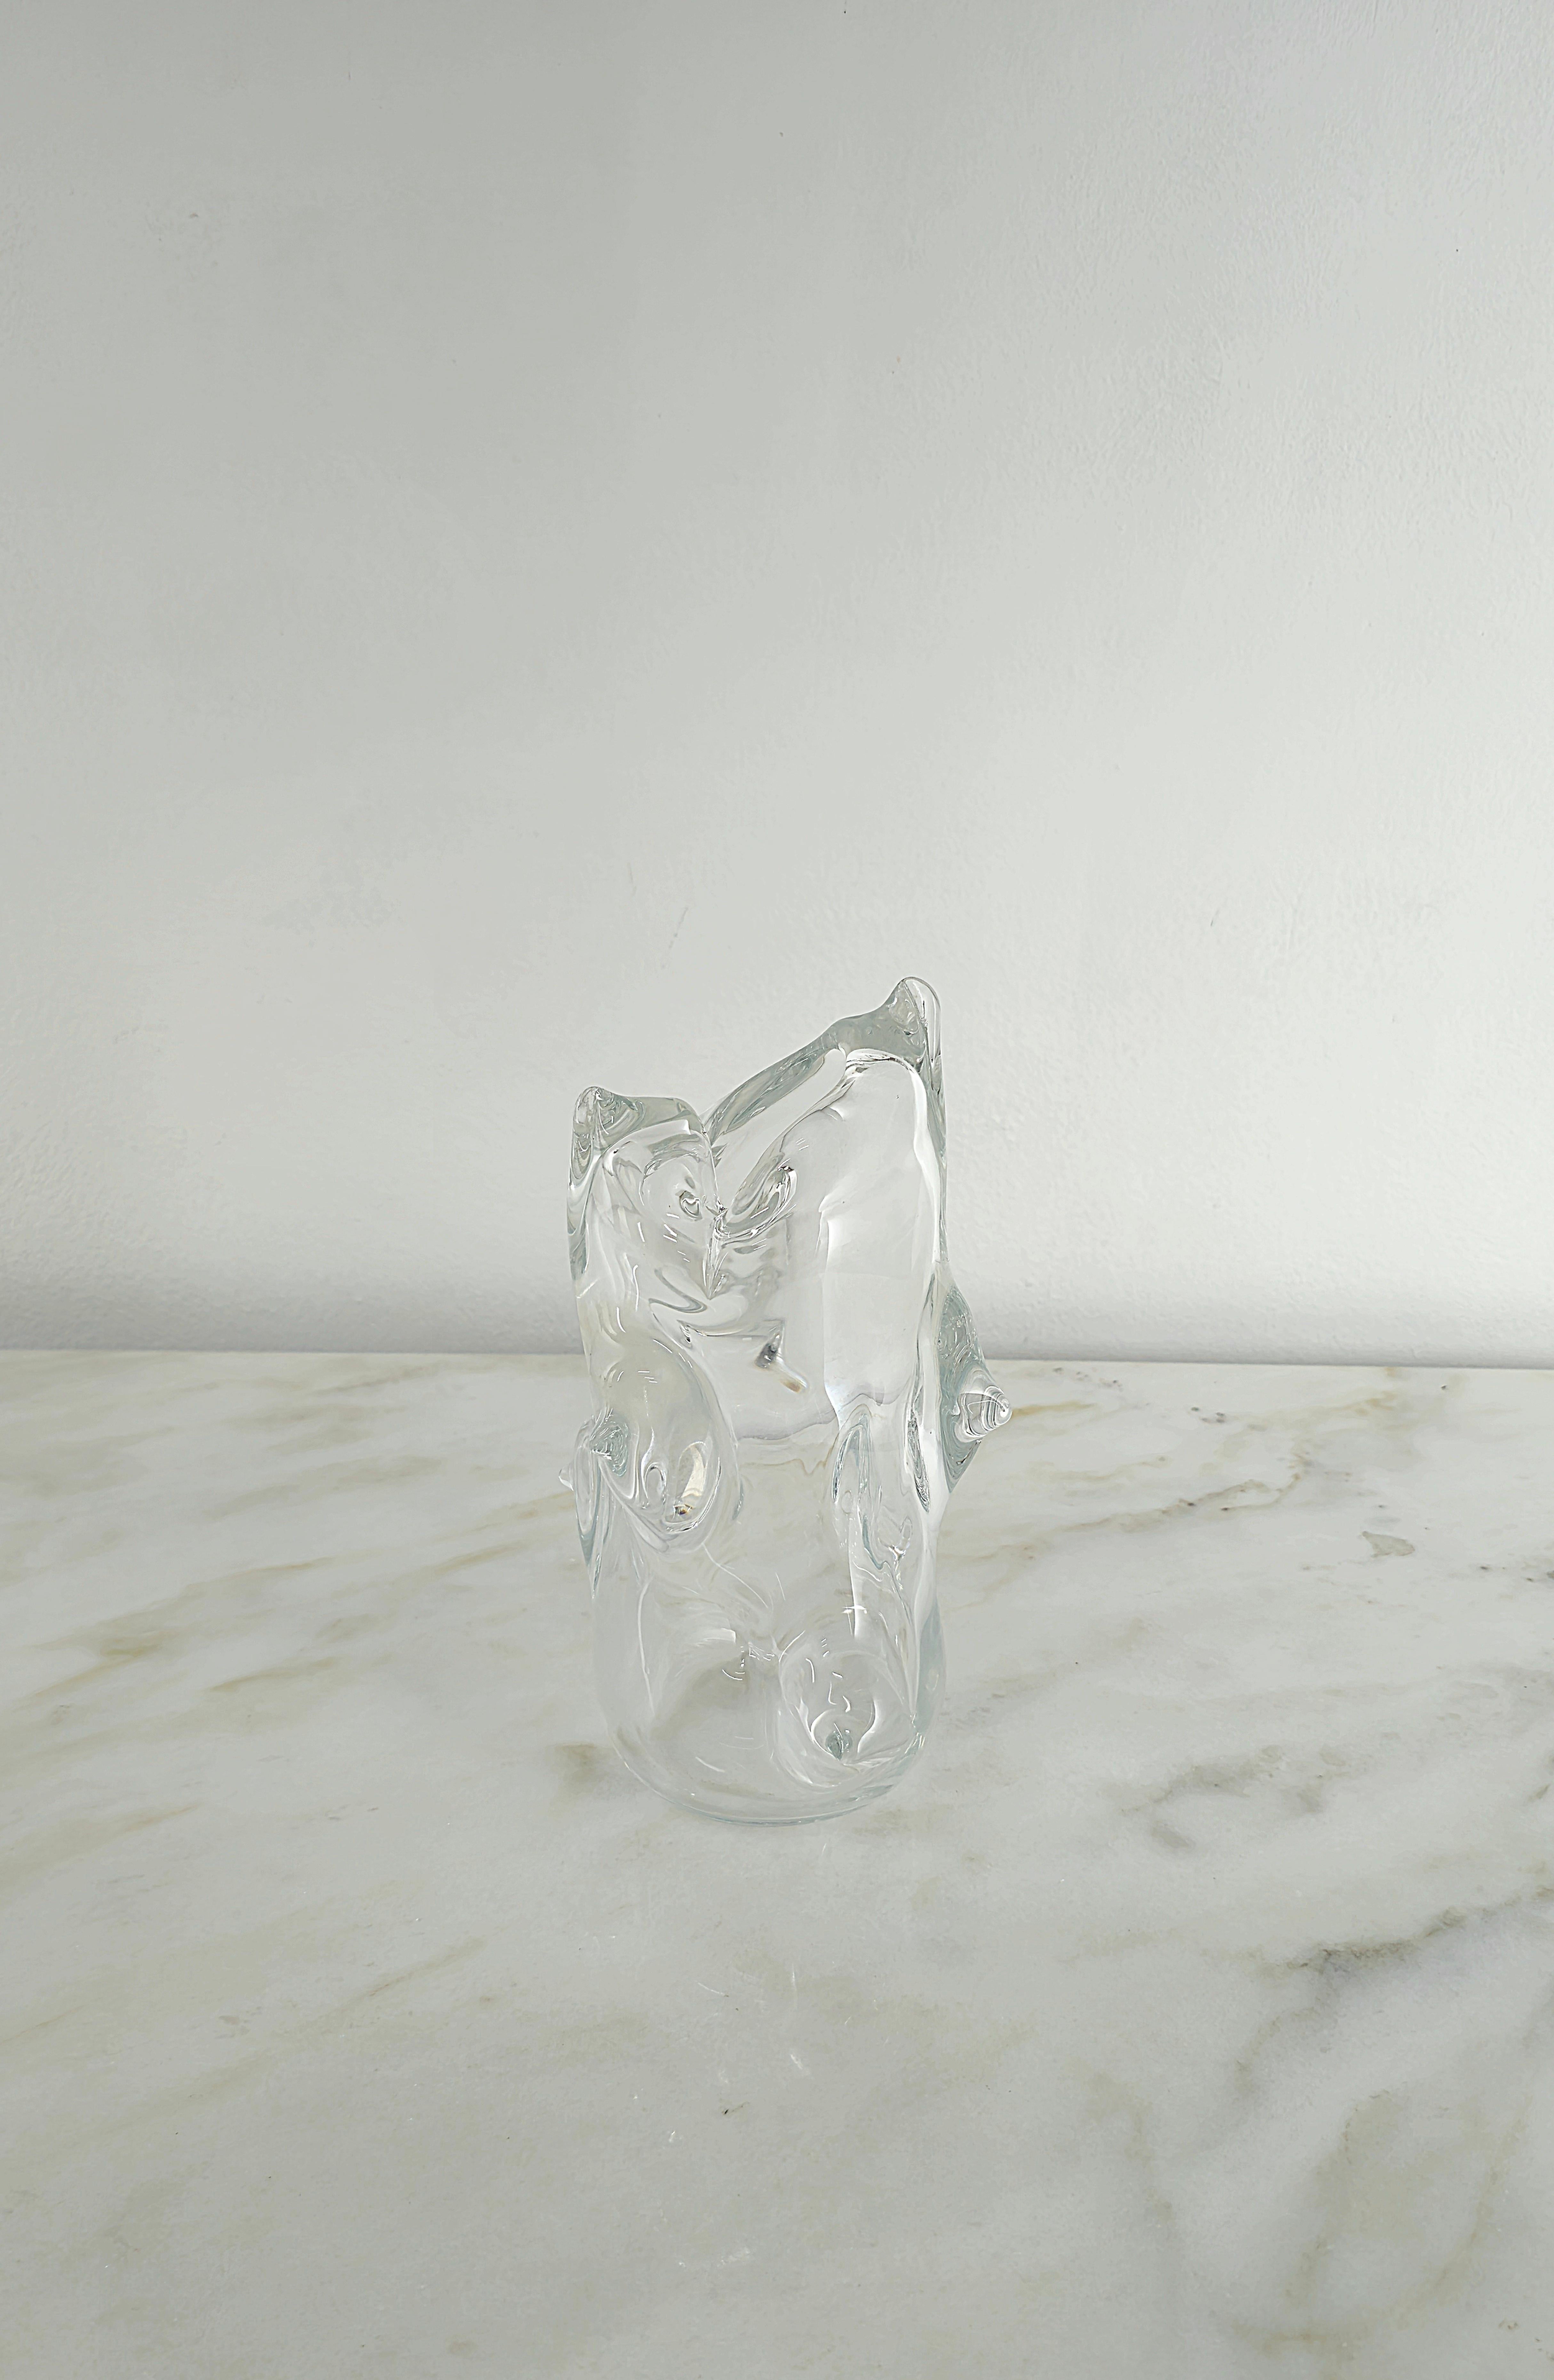 Vase/decorative object in the style of Archimede Seguso made of transparent and double Murano glass as a 